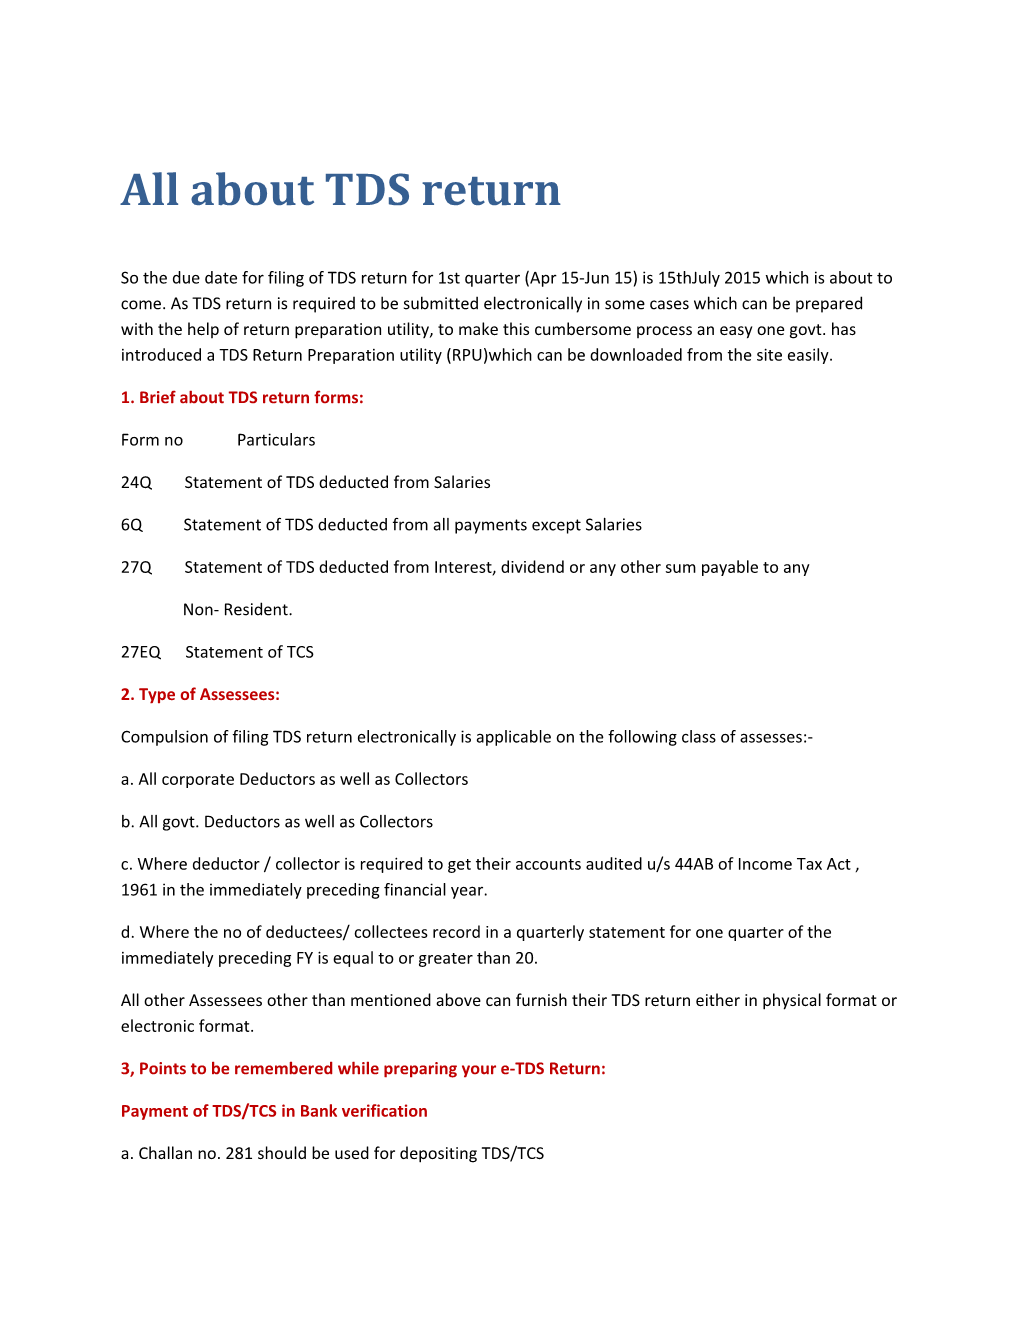 All About TDS Return